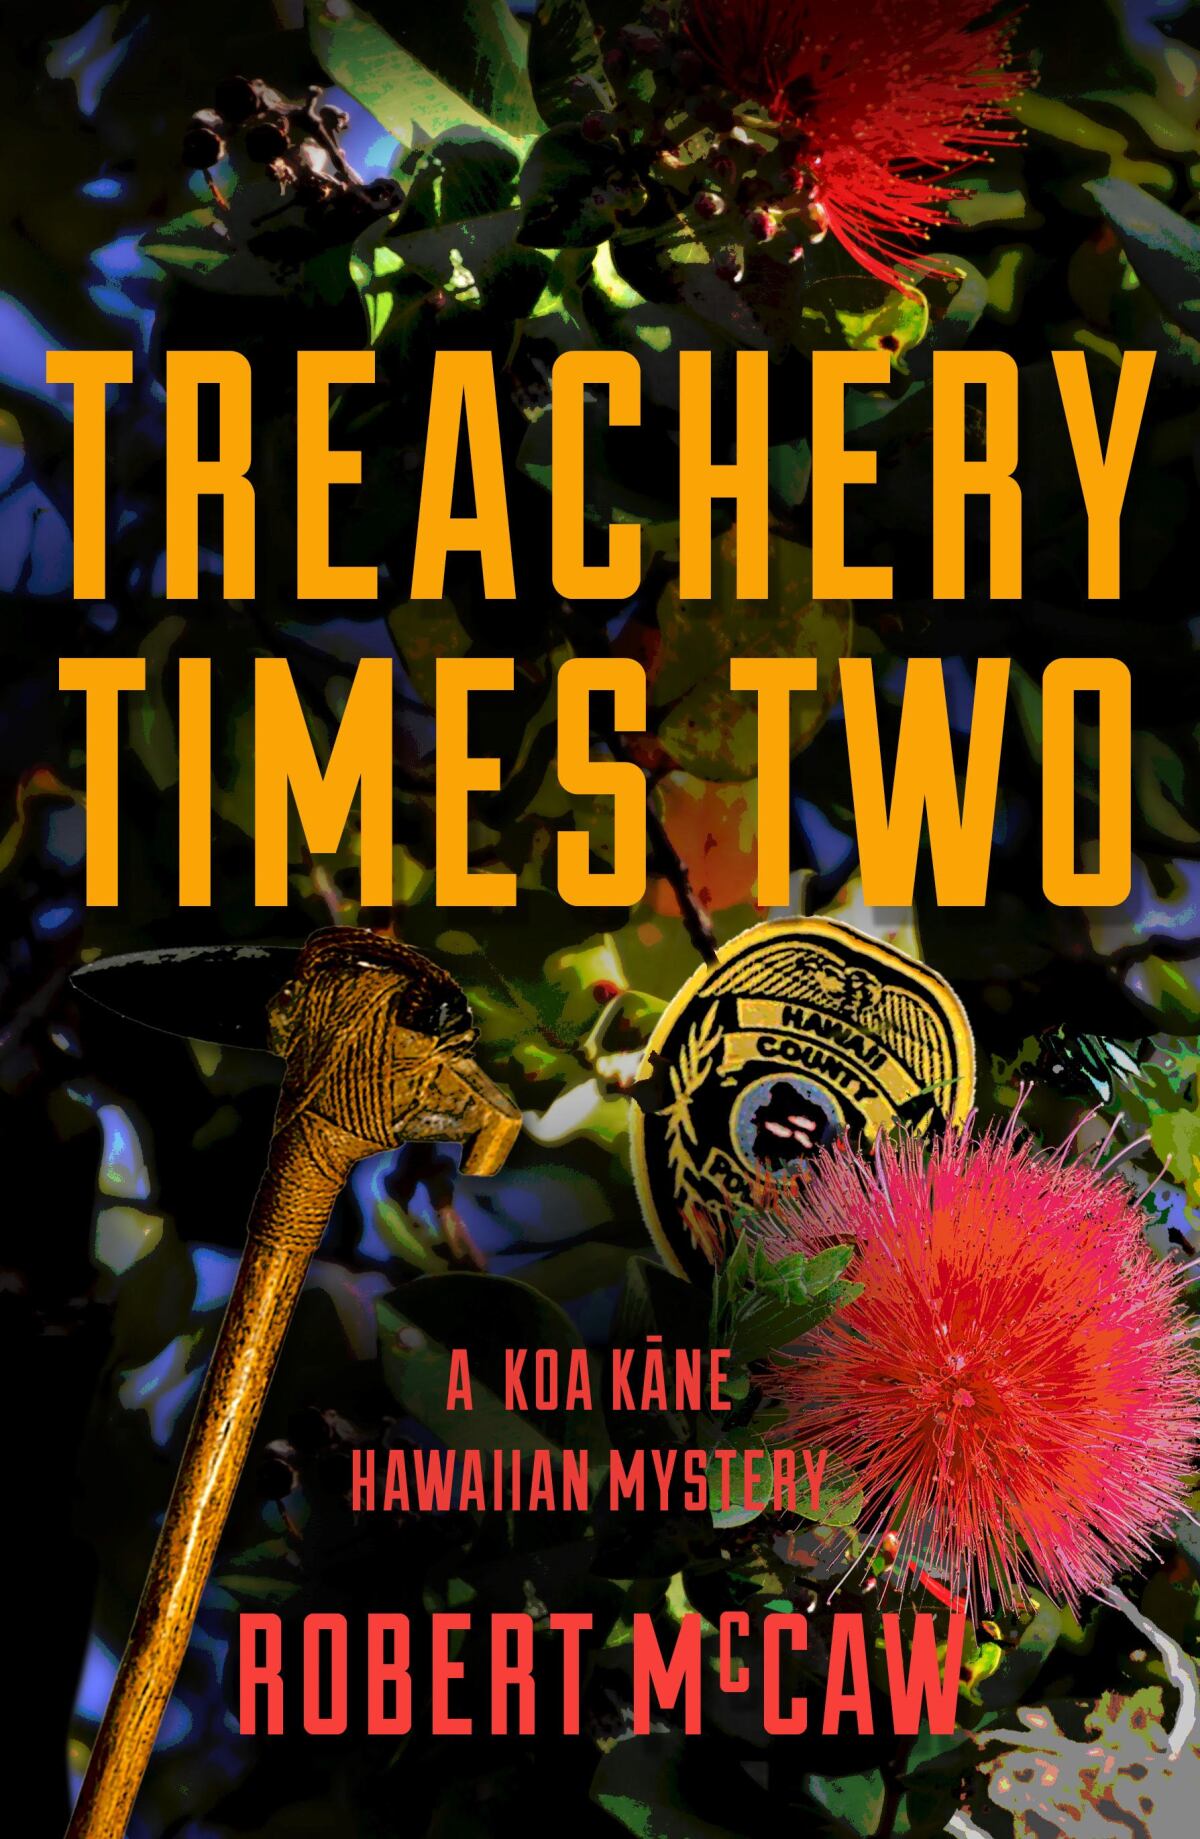 "Treachery Times Two" is the most recent release from part-time La Jolla resident Robert McCaw.